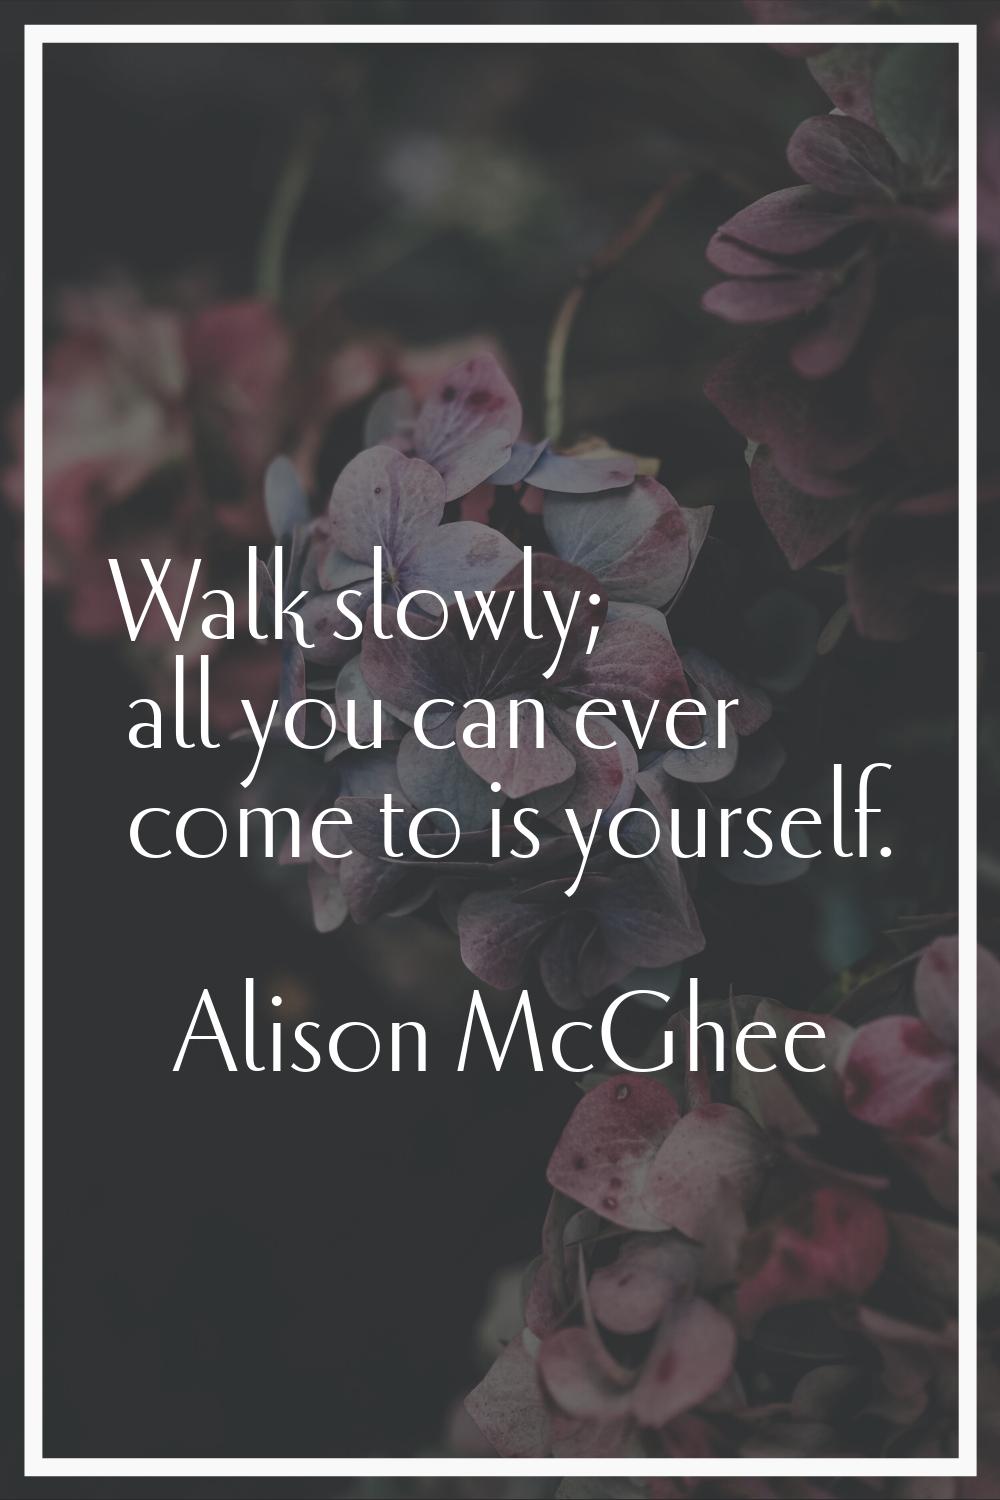 Walk slowly; all you can ever come to is yourself.